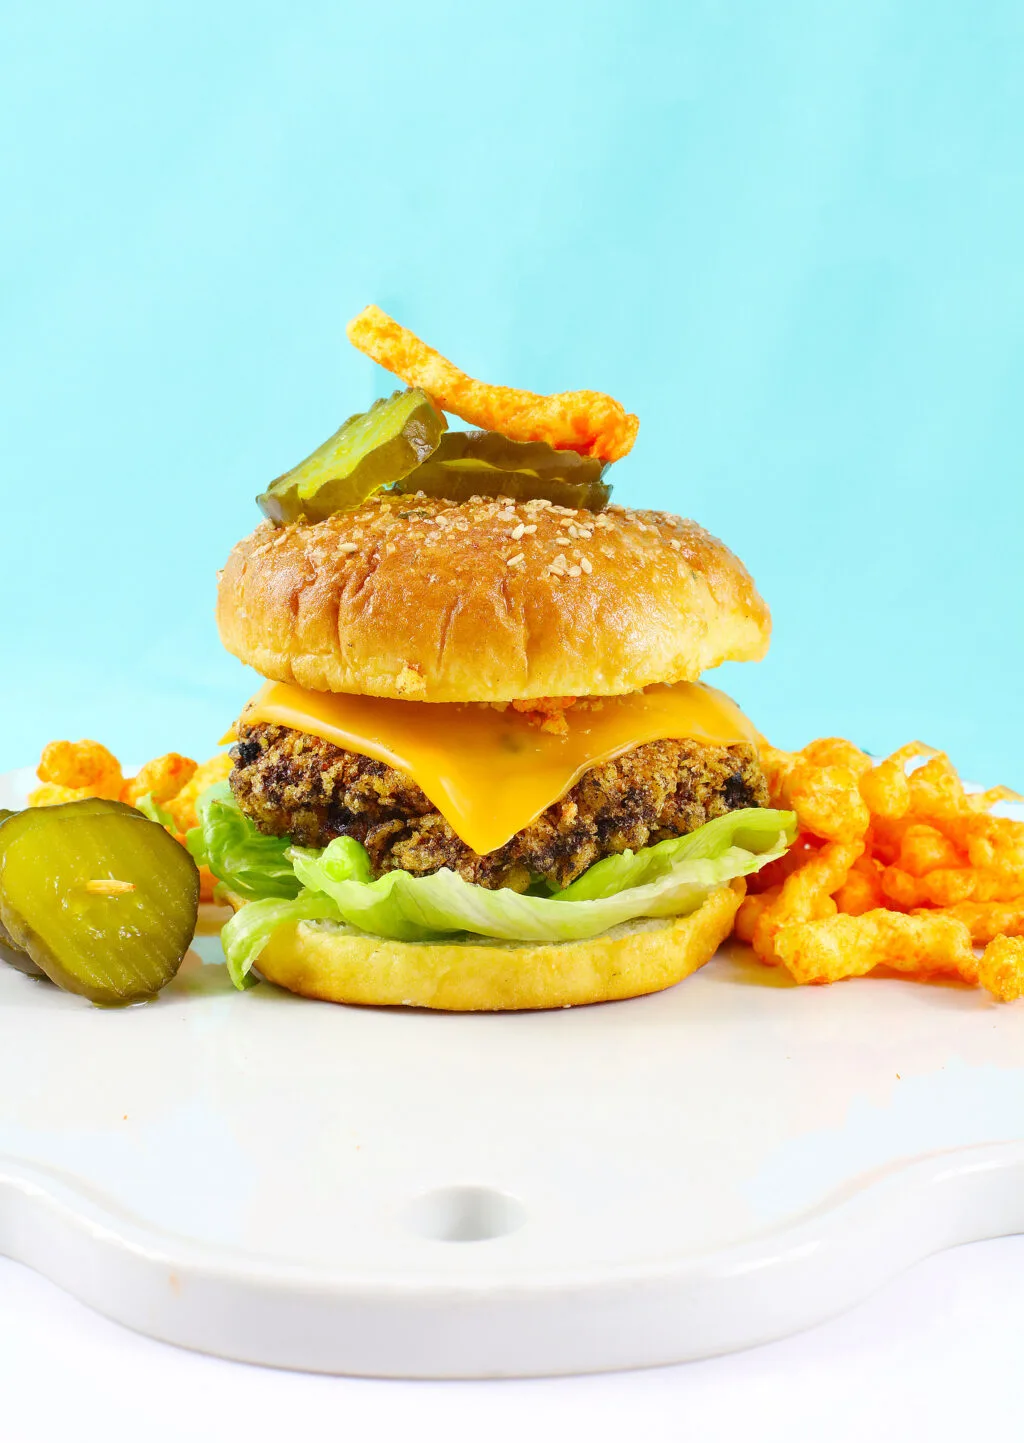 a fully cooked cheetos cheeseburger on a table